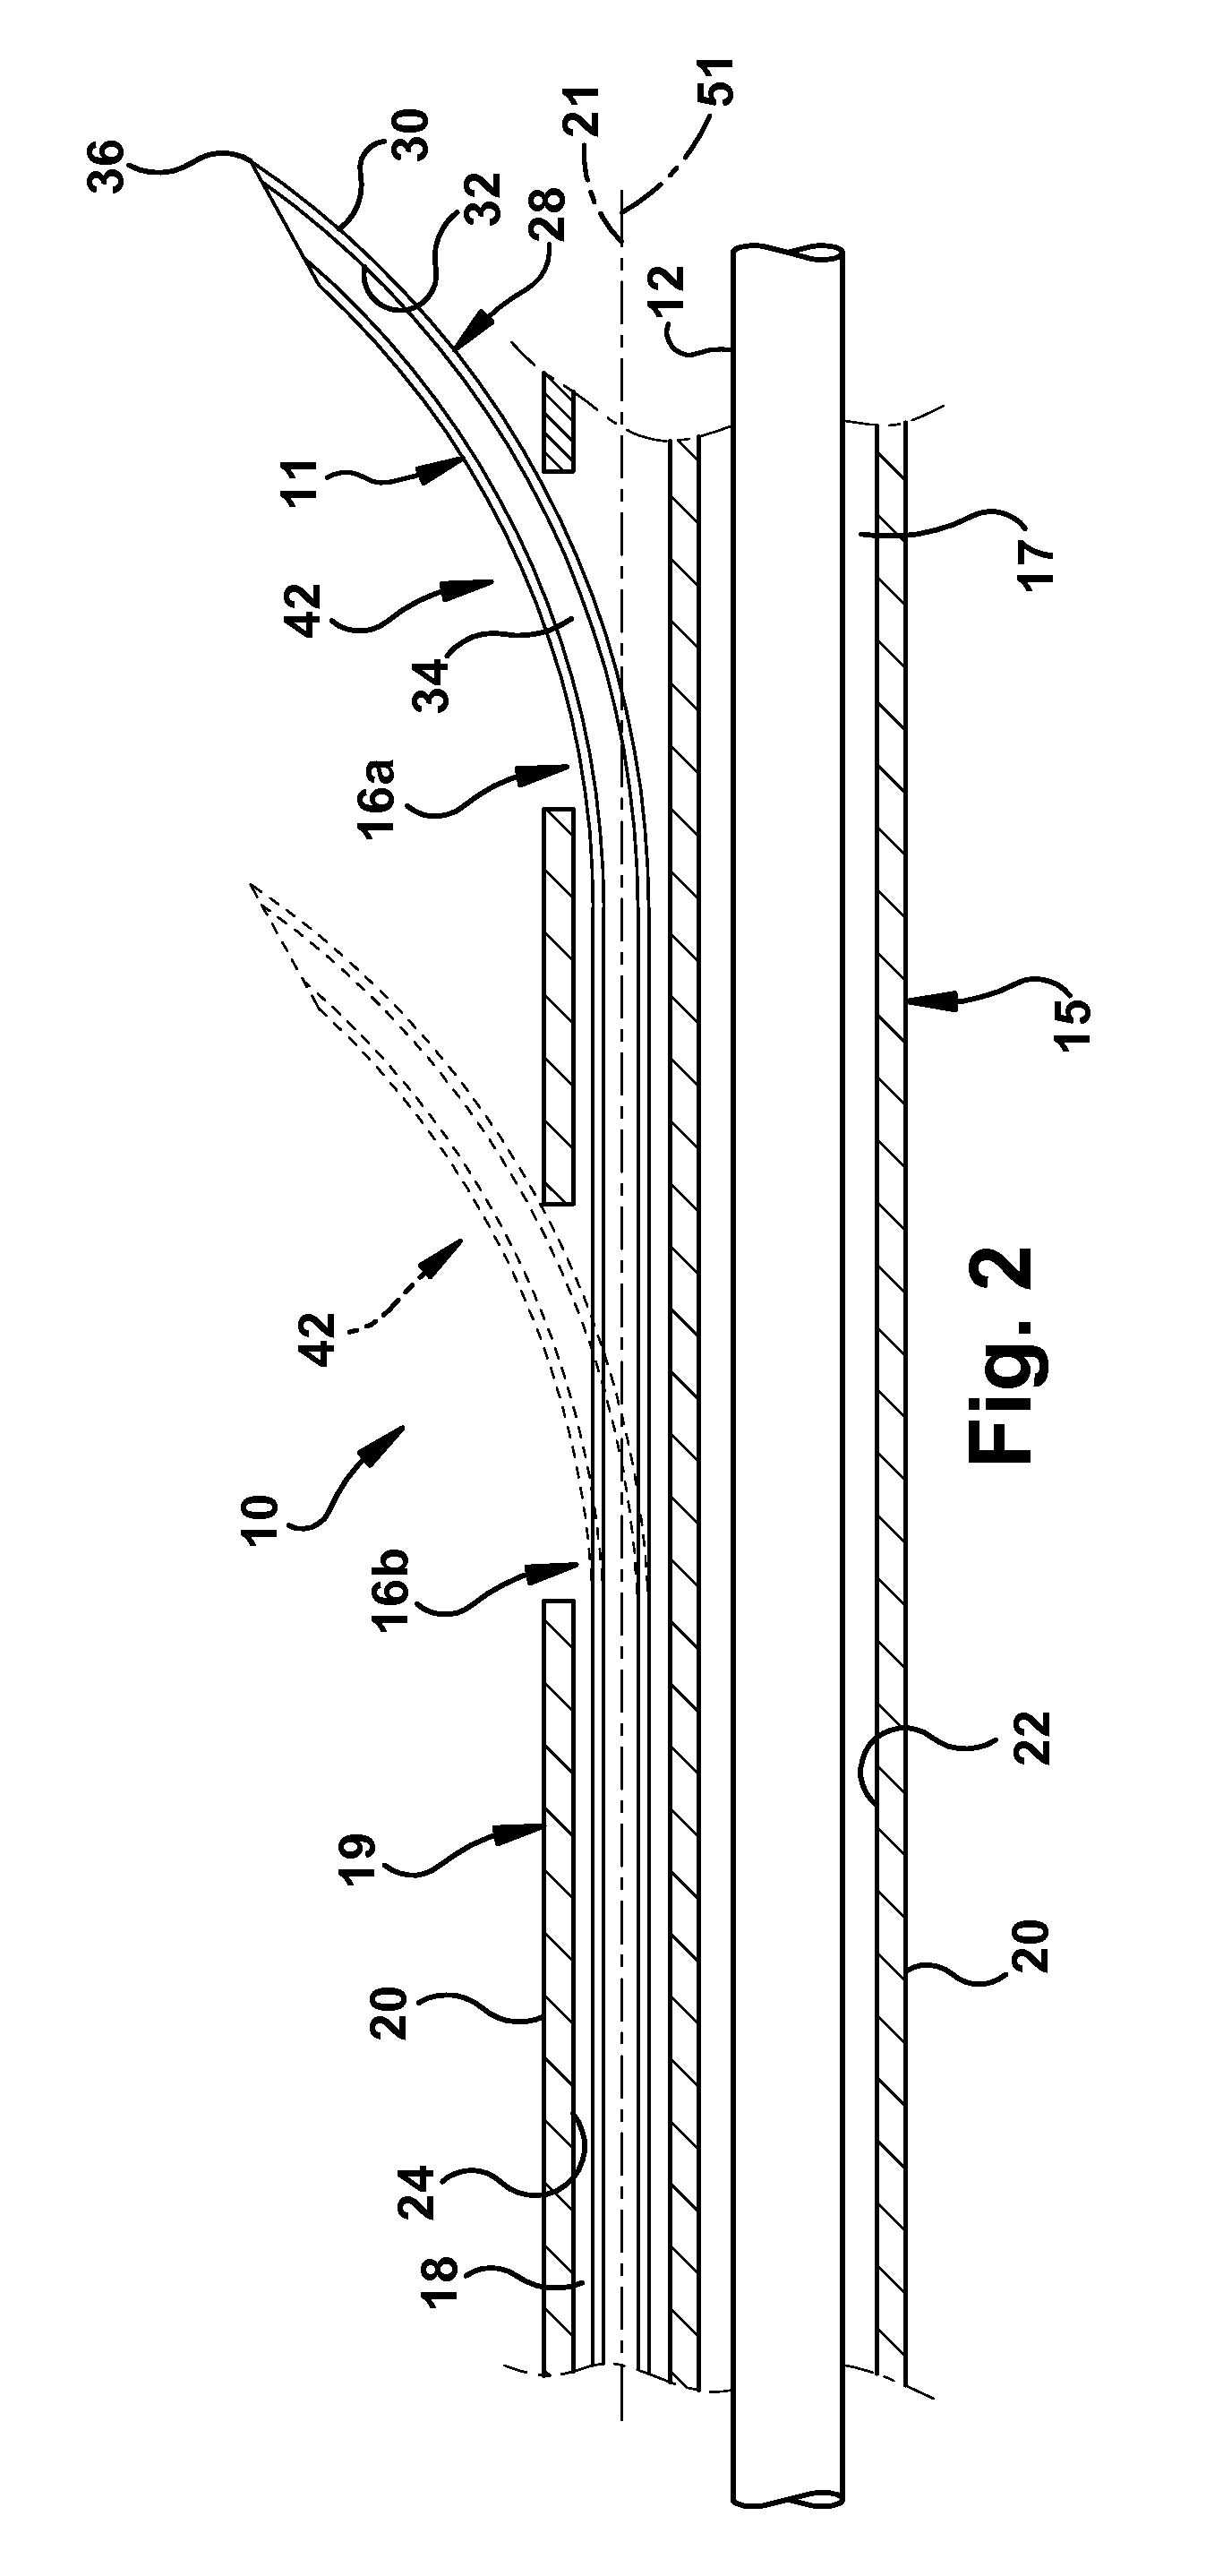 Catheter assembly and method of treating a vascular disease